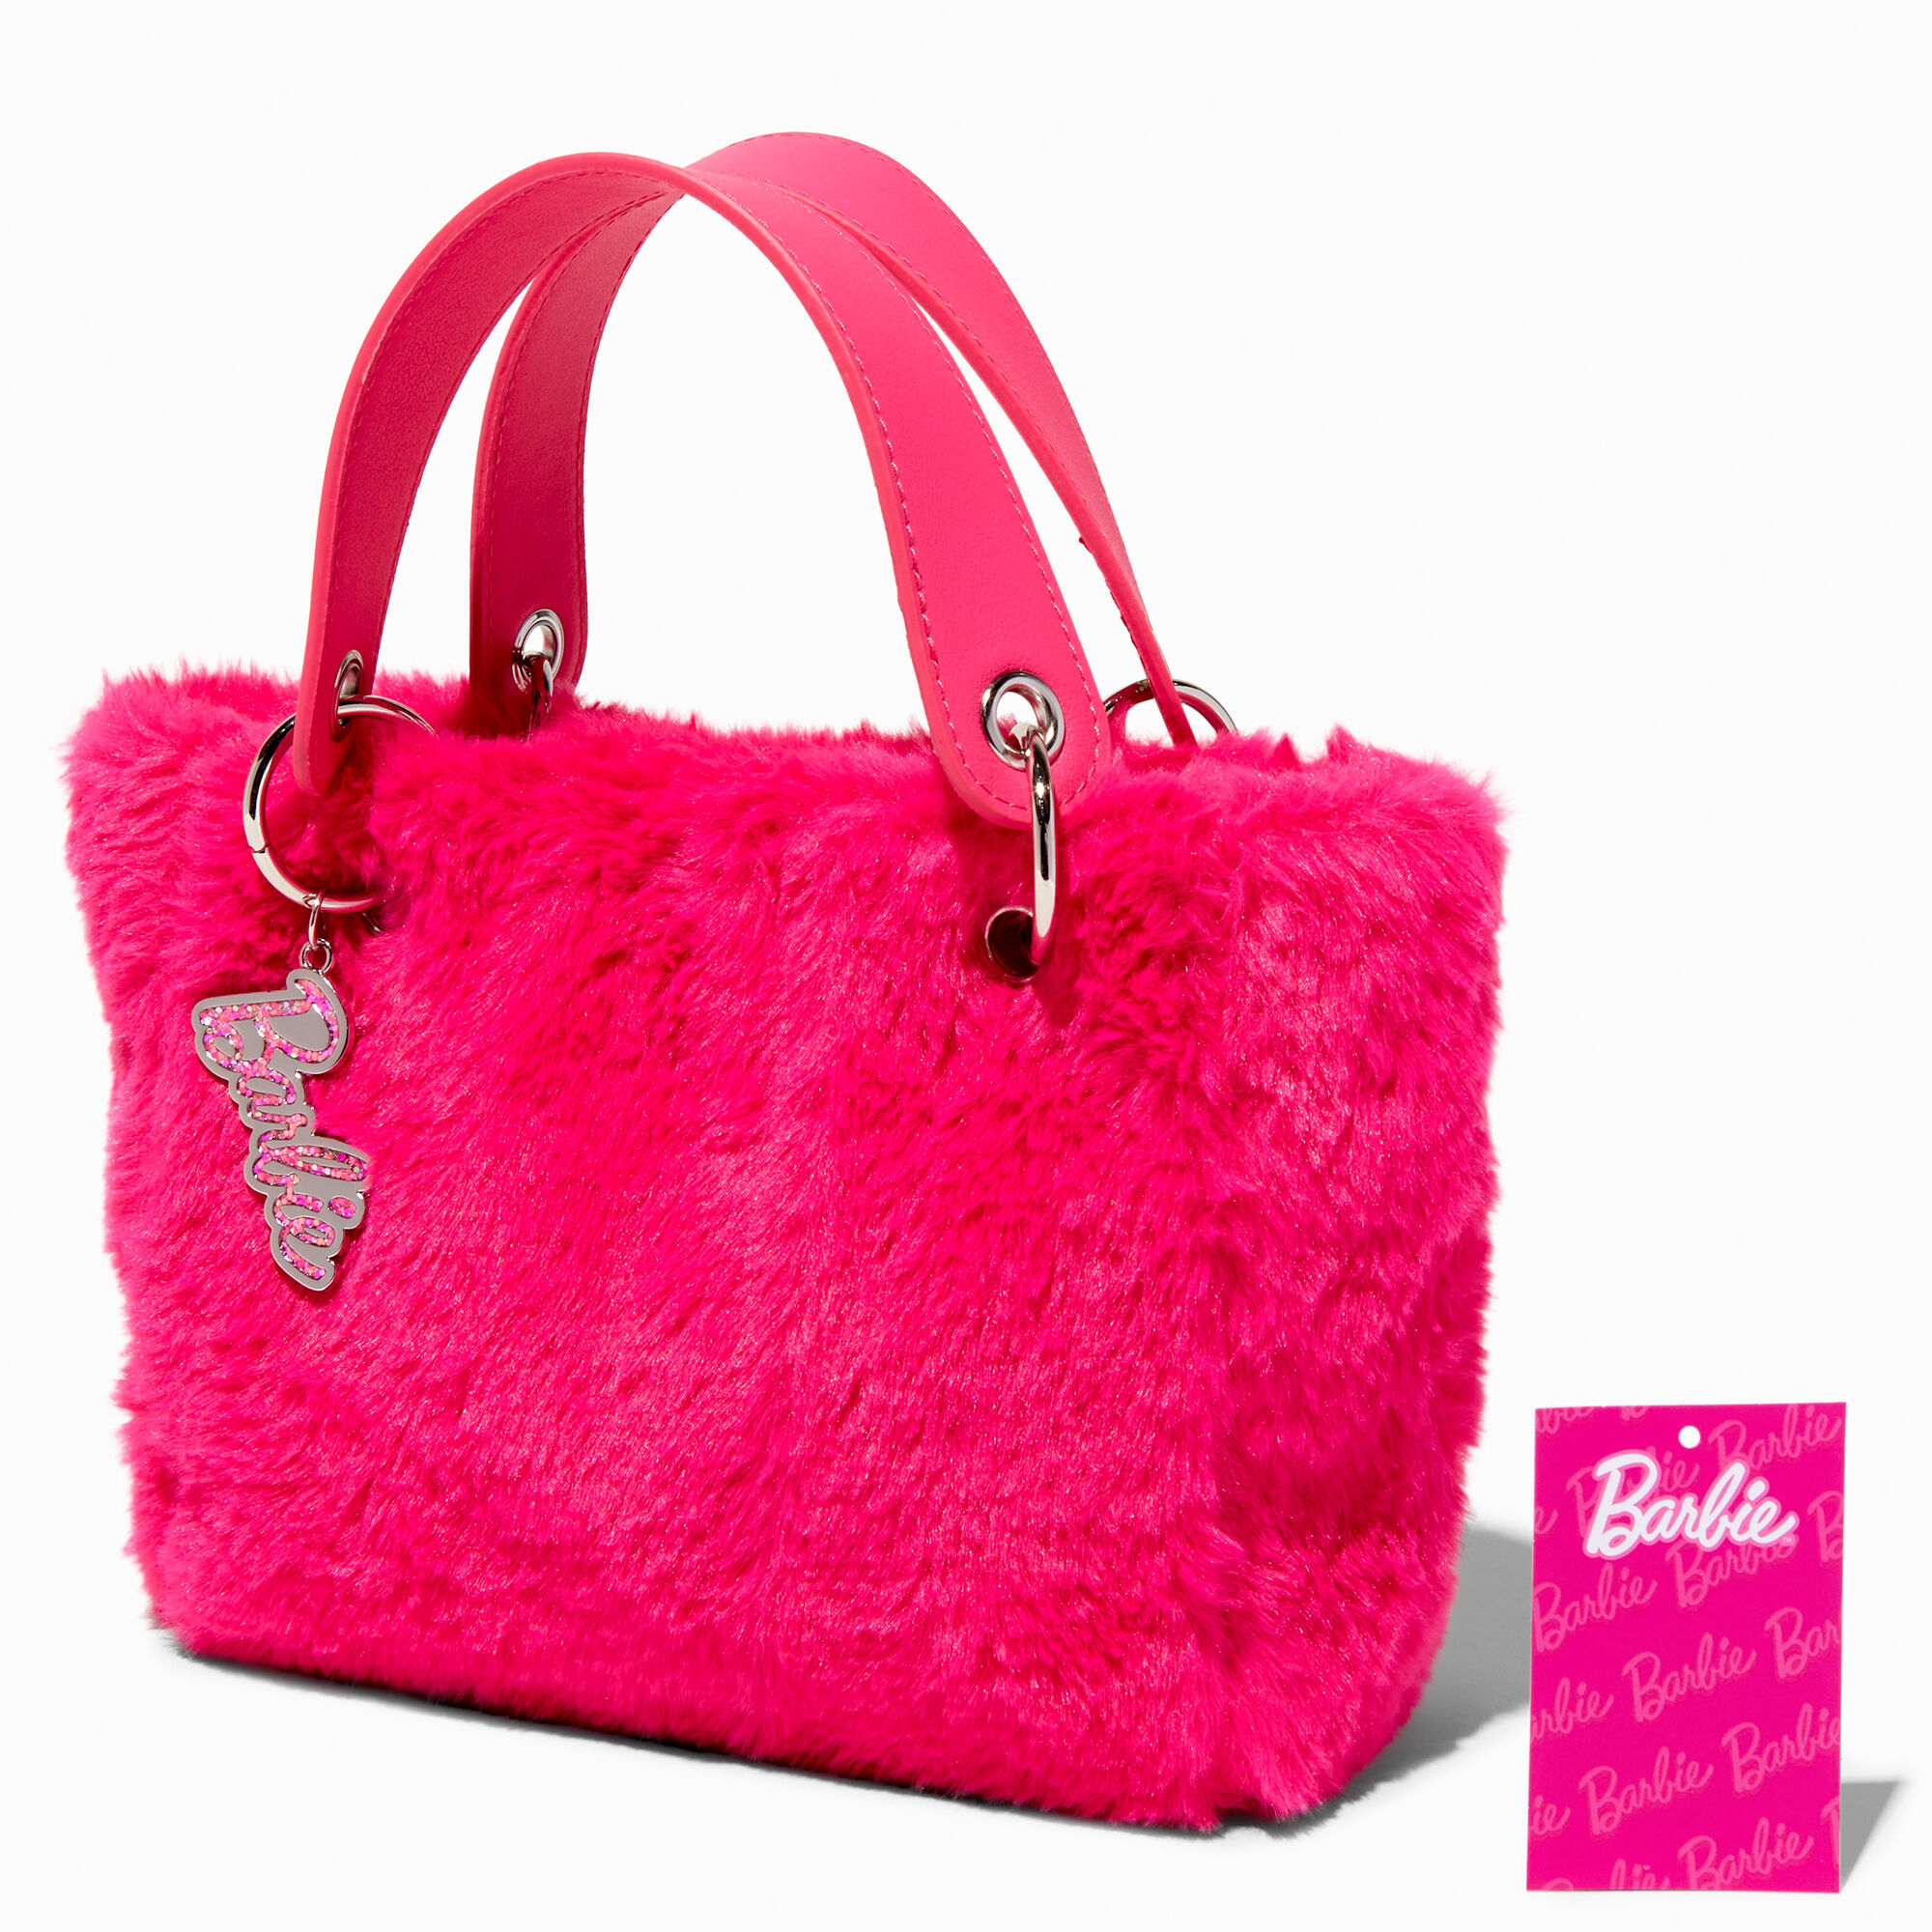 pink the tote bag